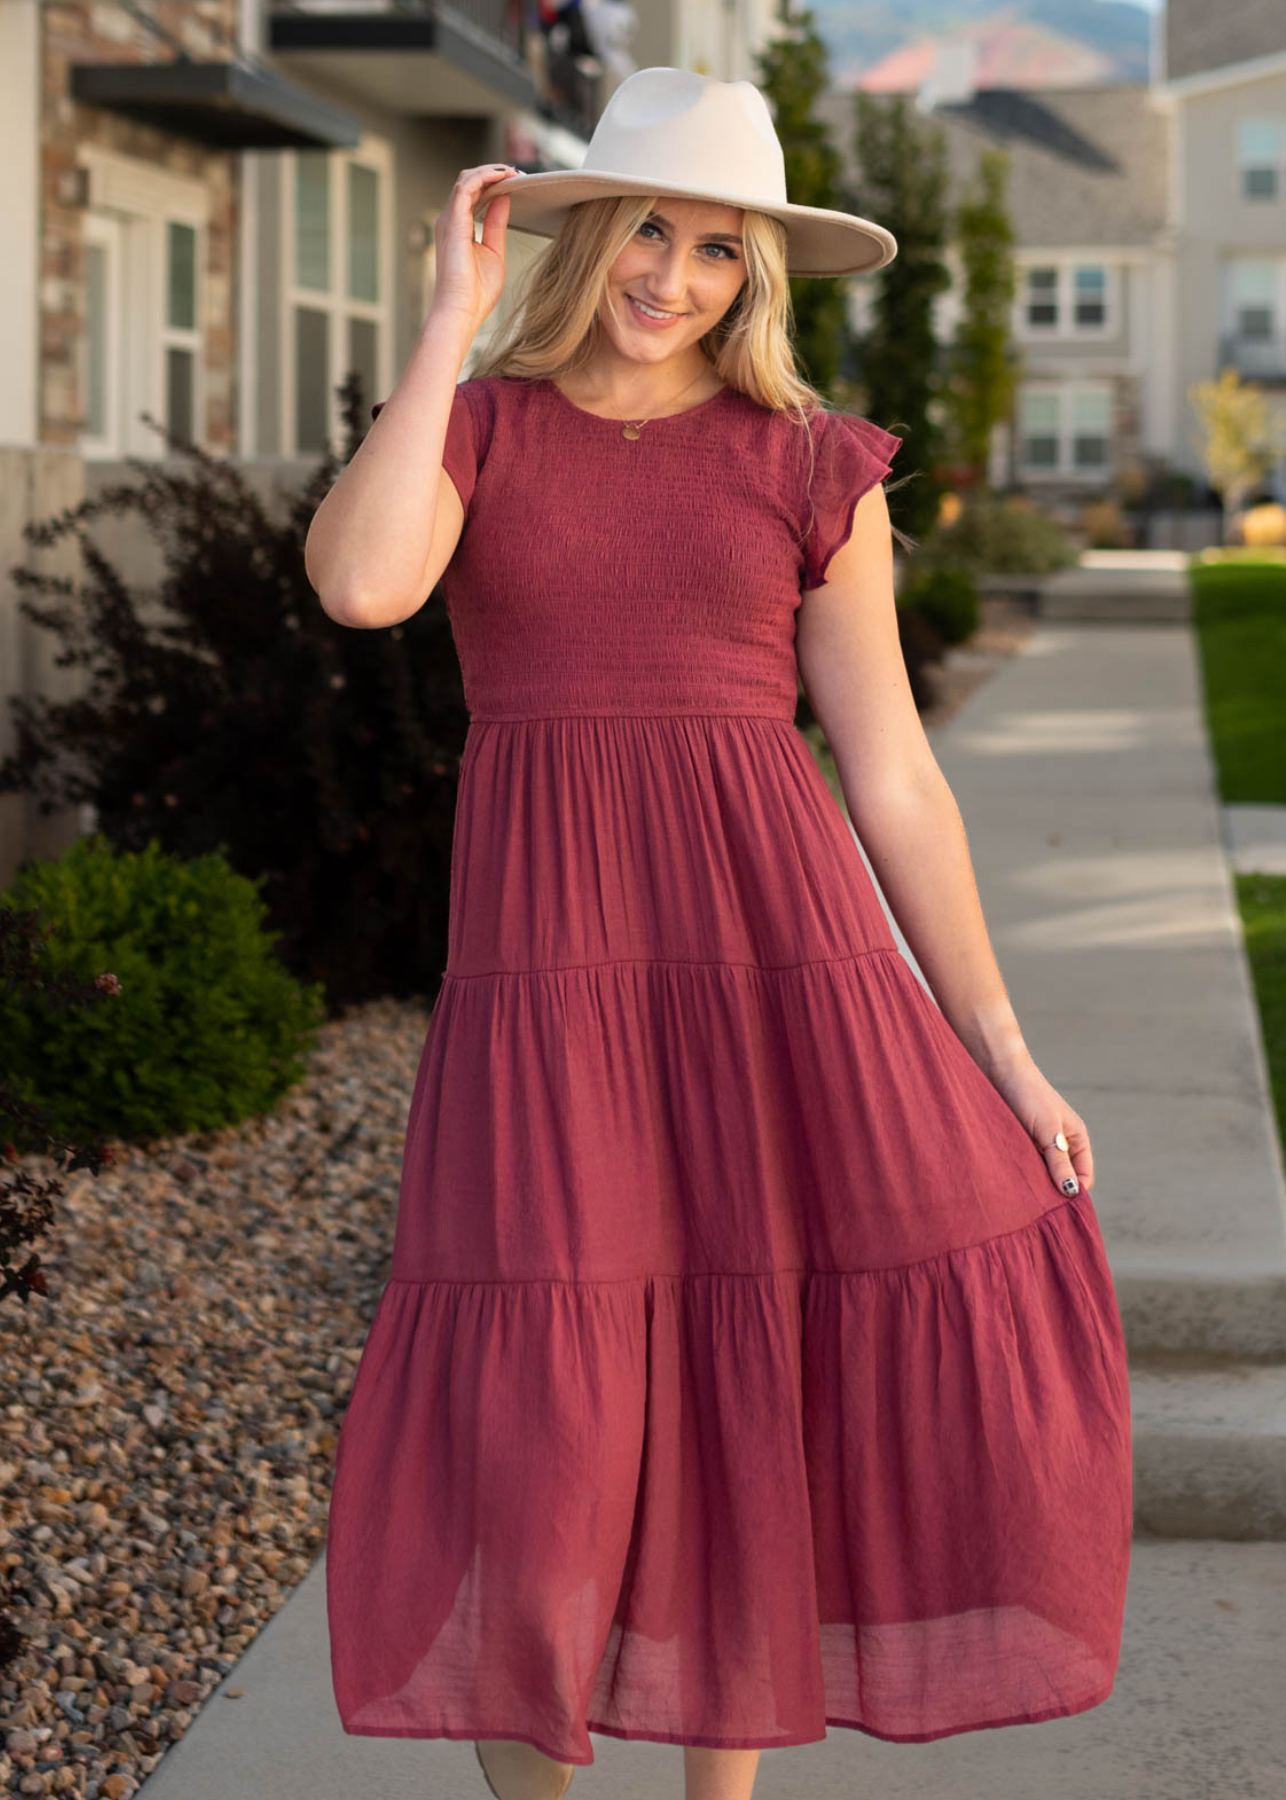 Yours truly raspberry dress with a smocked bodice and tiered skirt